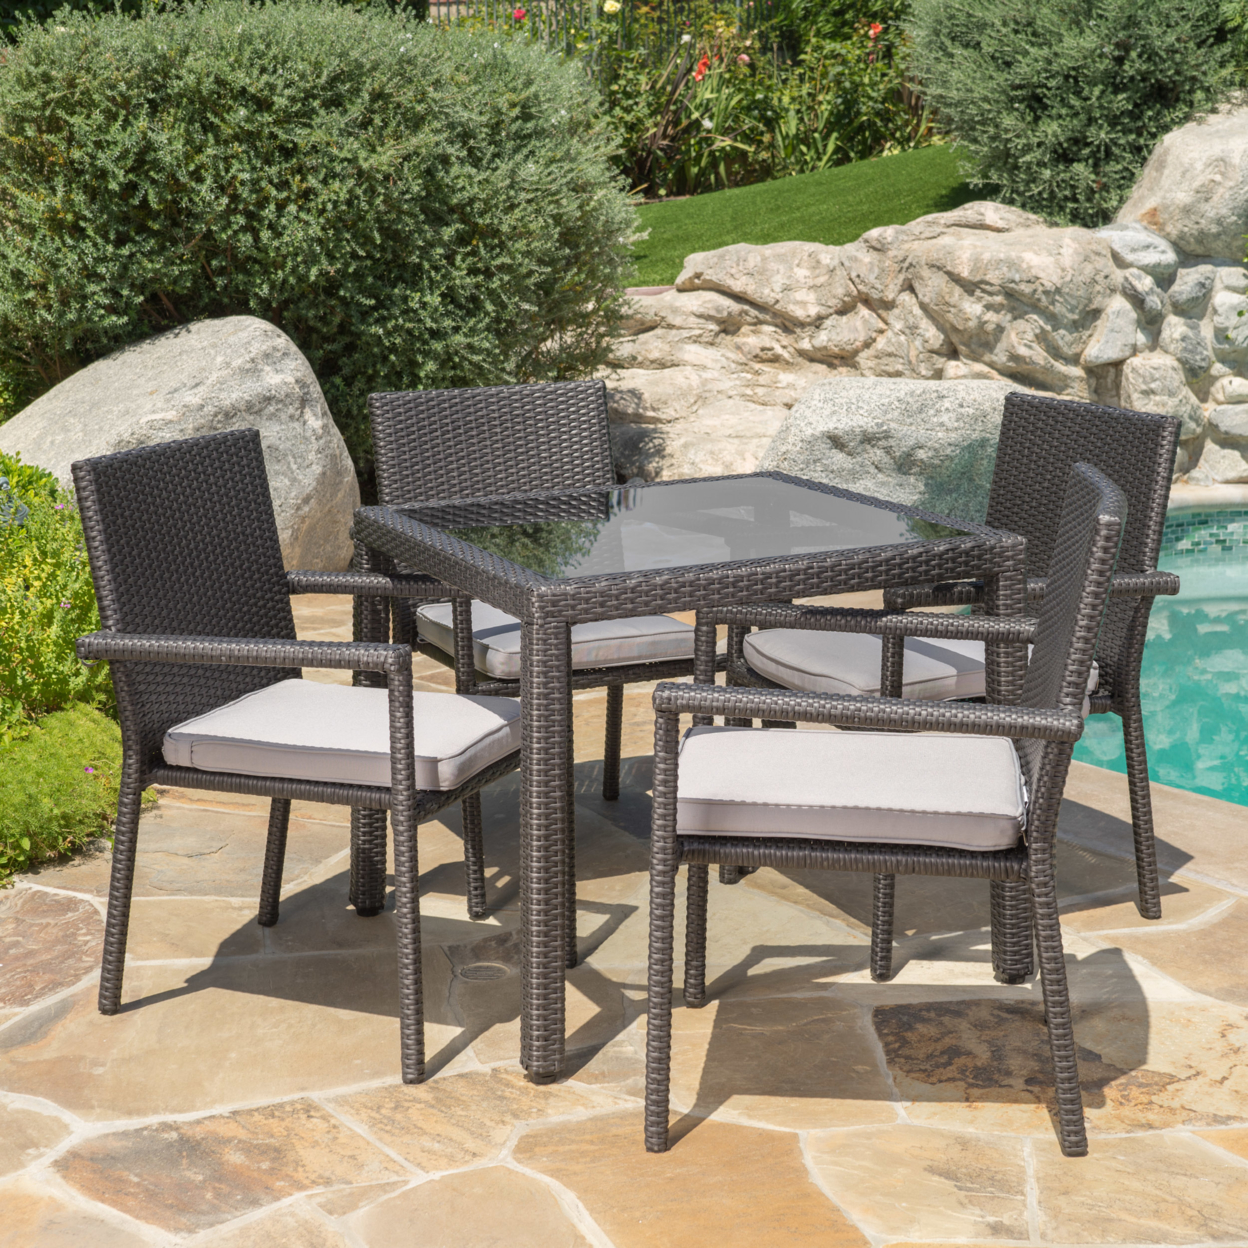 San Tropez Outdoor 5 Piece Dining Set With Water Resistant Cushions - Multi-brown/Textured Beige